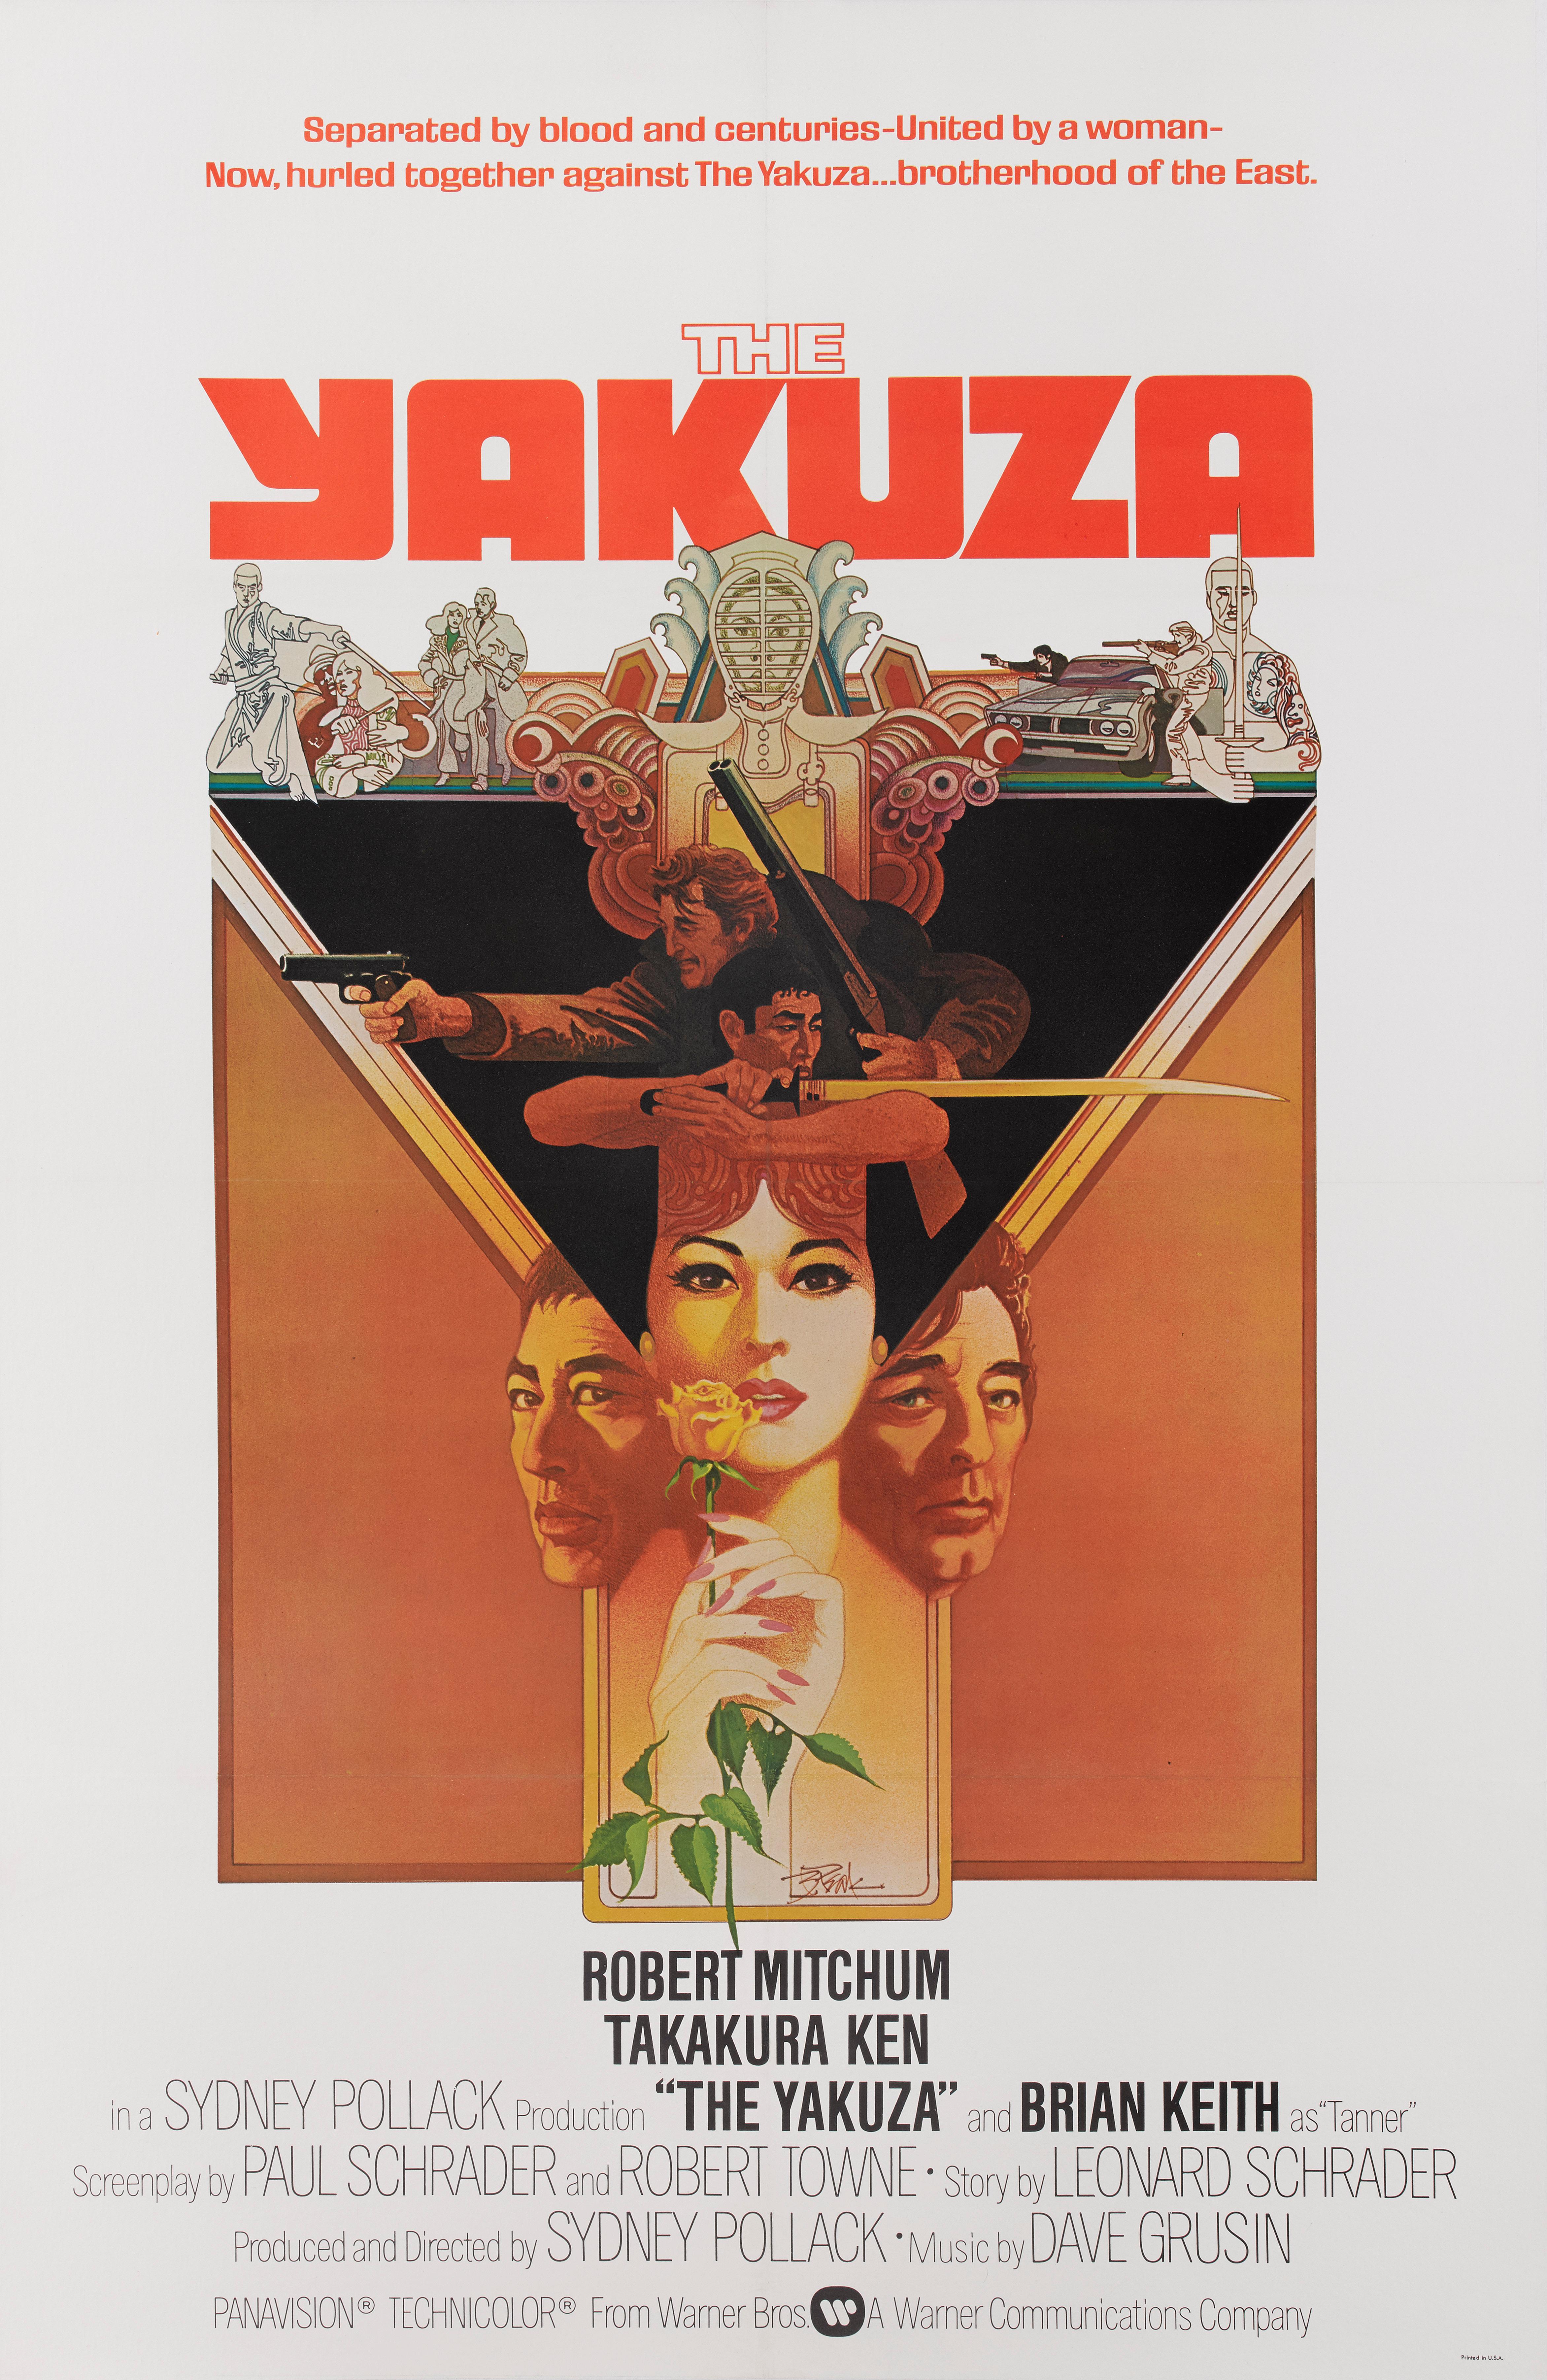 Original US film poster for the 1975 action film The Yakuza.
The artwork on this poster was created by the great film poster designer Bob Peak (1927-1992)
This film starred Robert Mitchum, Ken Takakura and Brian Keith, and was directed by Sydney